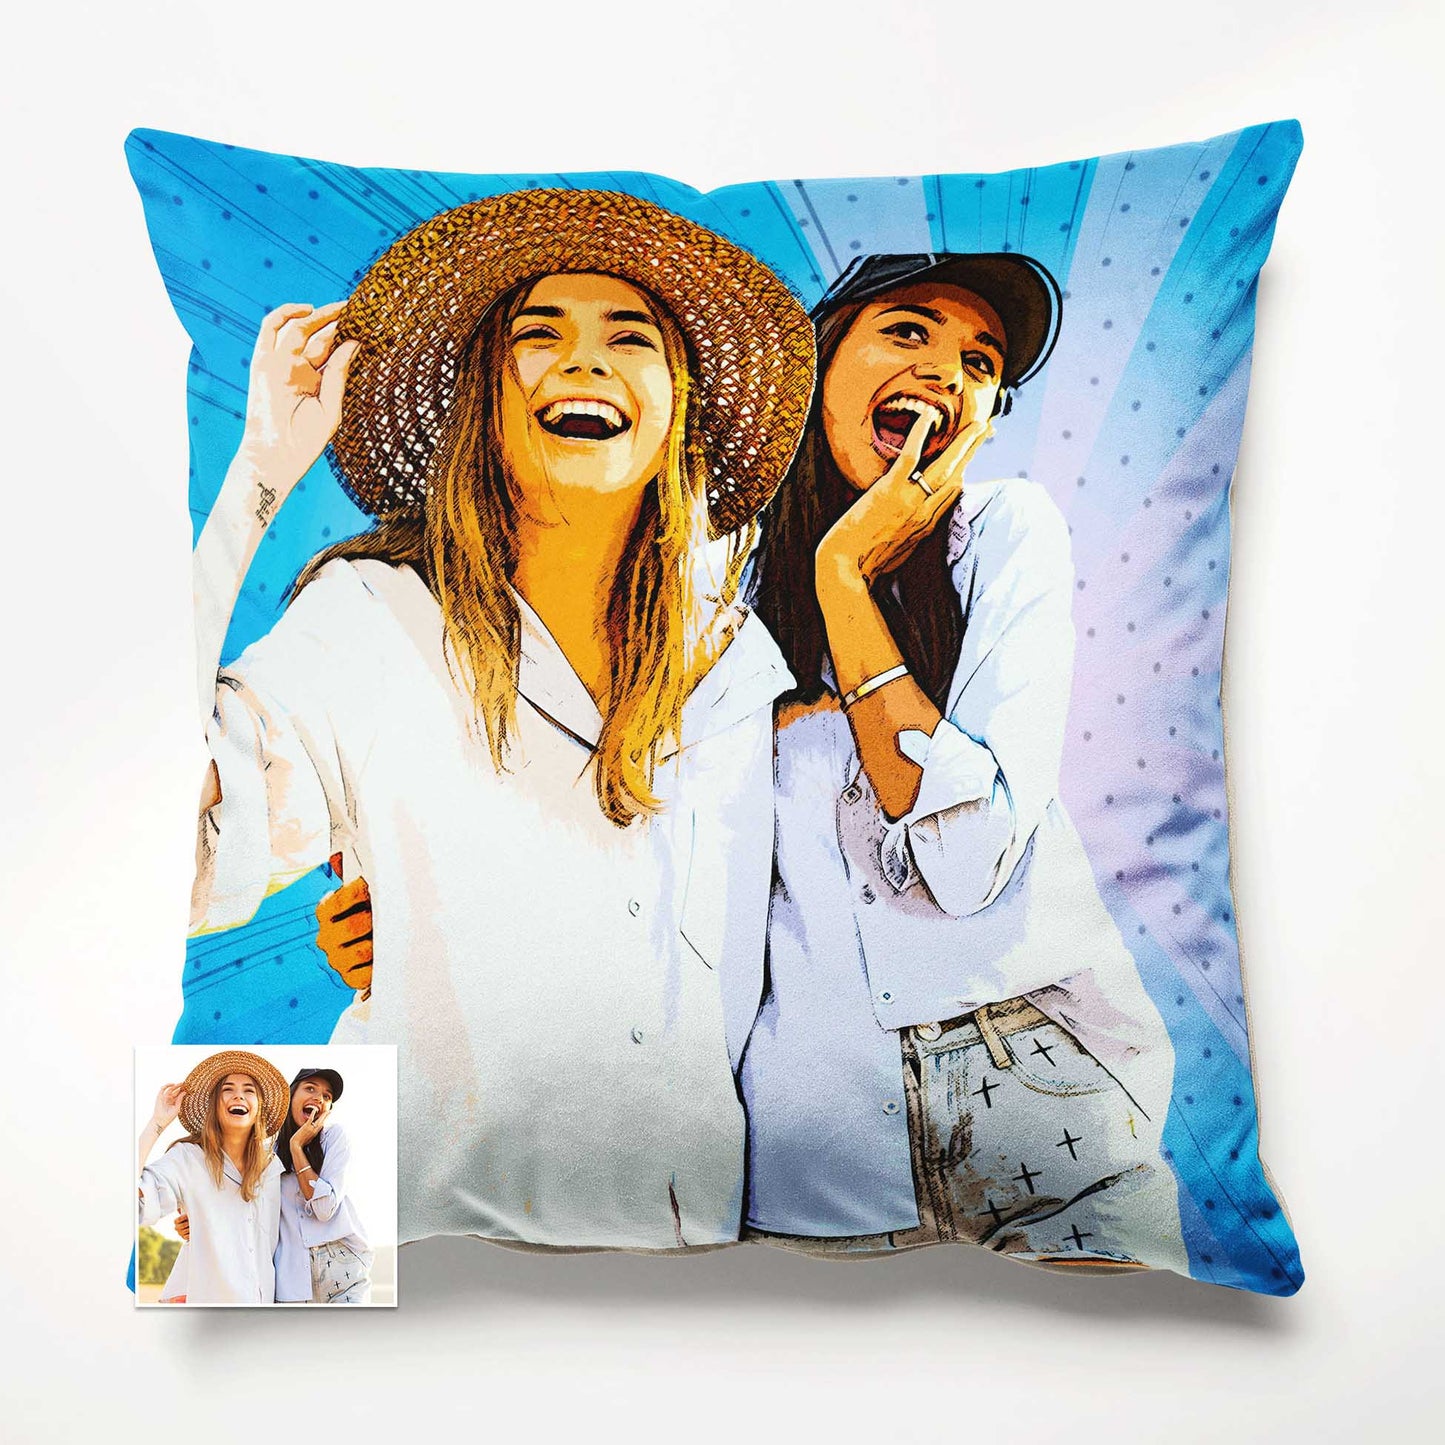 The Personalised Cartoon Comics Cushion combines the warmth and comfort of a cushion with the playful charm of a cartoon. Featuring a cartoon illustration created from your own photo, it adds a personal touch to your living space